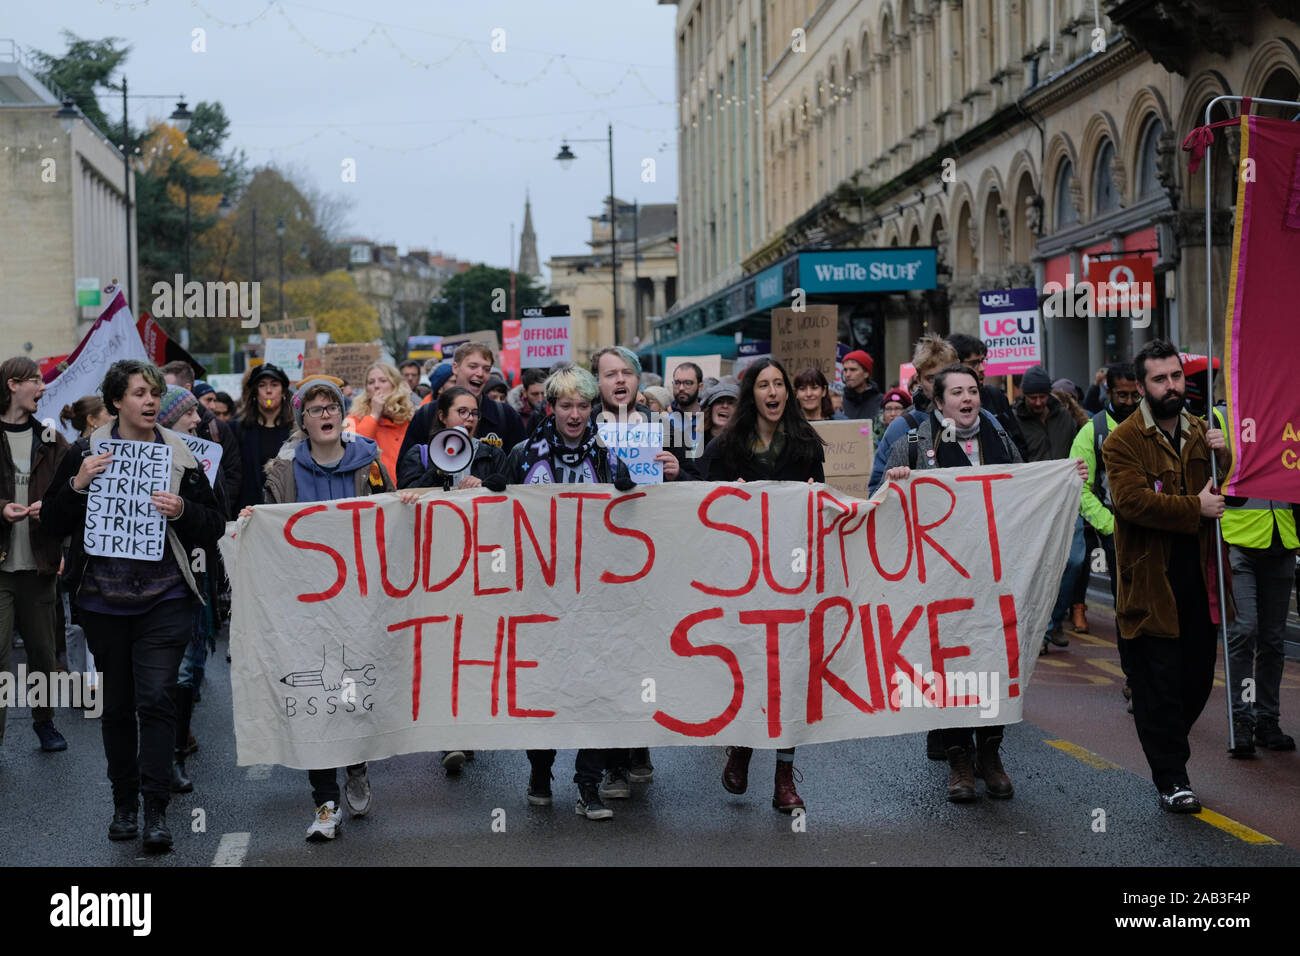 Bristol, UK, 25th November 2019. University lecturers have commenced a series of strikes protesting changes to their Pension Scheme. The University and College Union (UCU) lecturer strike was supported by students and other local groups. A group gathered outside the Victoria Rooms, and after speeches and protests the rally passed peacefully down Park Street and dispersed on College Green. Credit: Mr Standfast/Alamy Live News Stock Photo